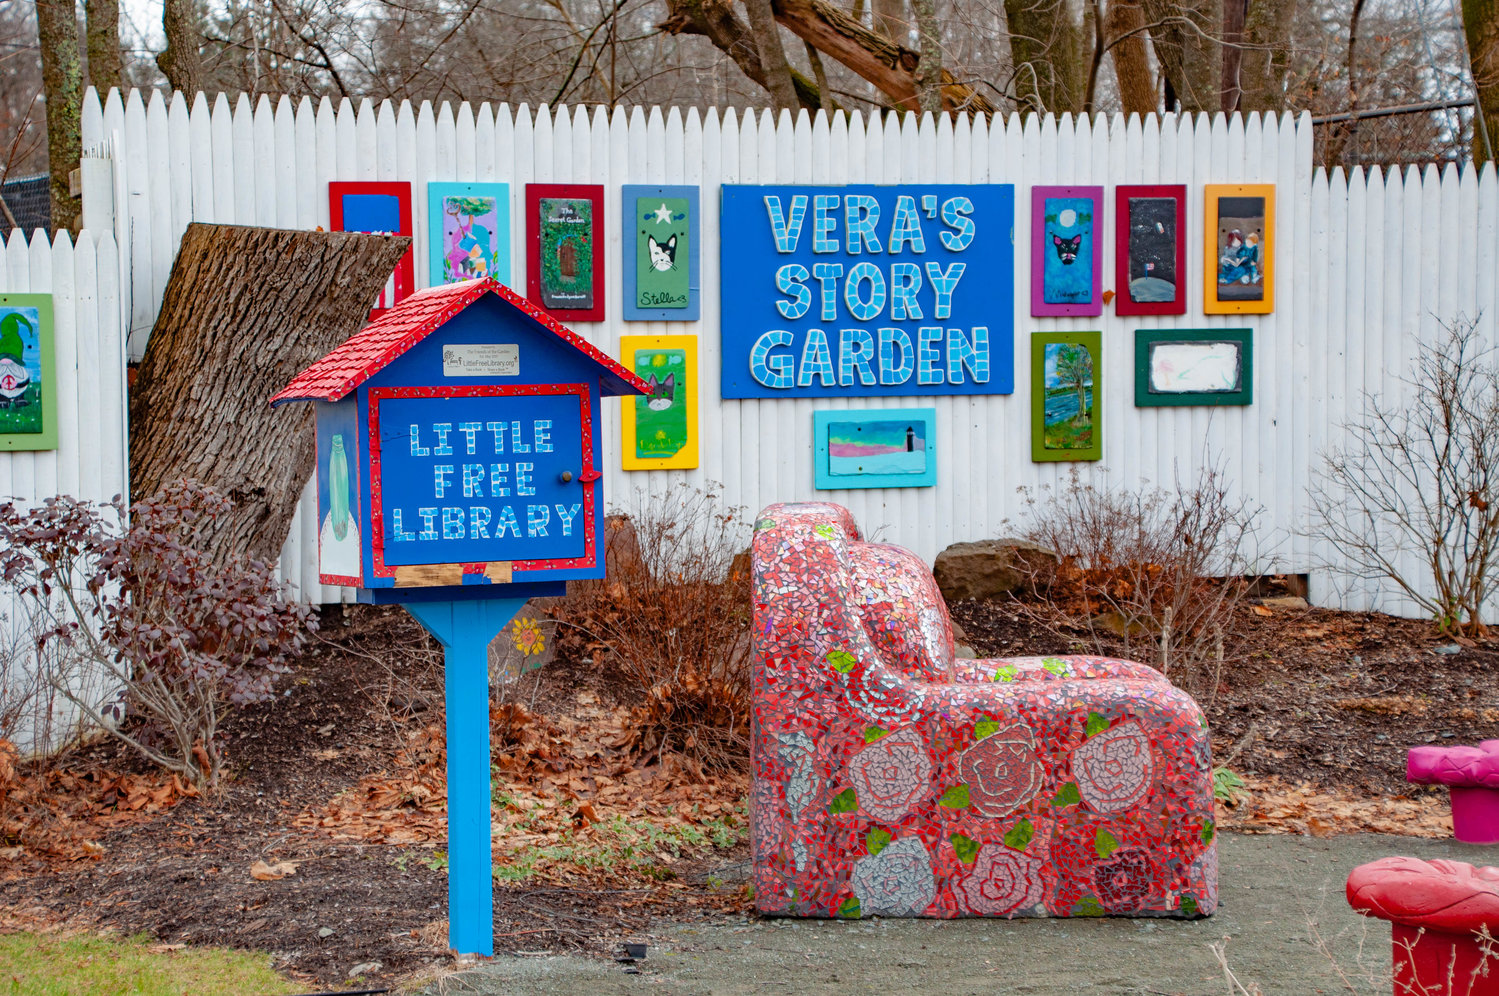 The Story Garden is a literary landmark alongside the Ethelbert B. Crawford Public Library in Monticello, N.Y. It serves as a lasting legacy to Vera B. Williams, her stories and illustrations, and to the inspiration she gave to the children she wrote them for.